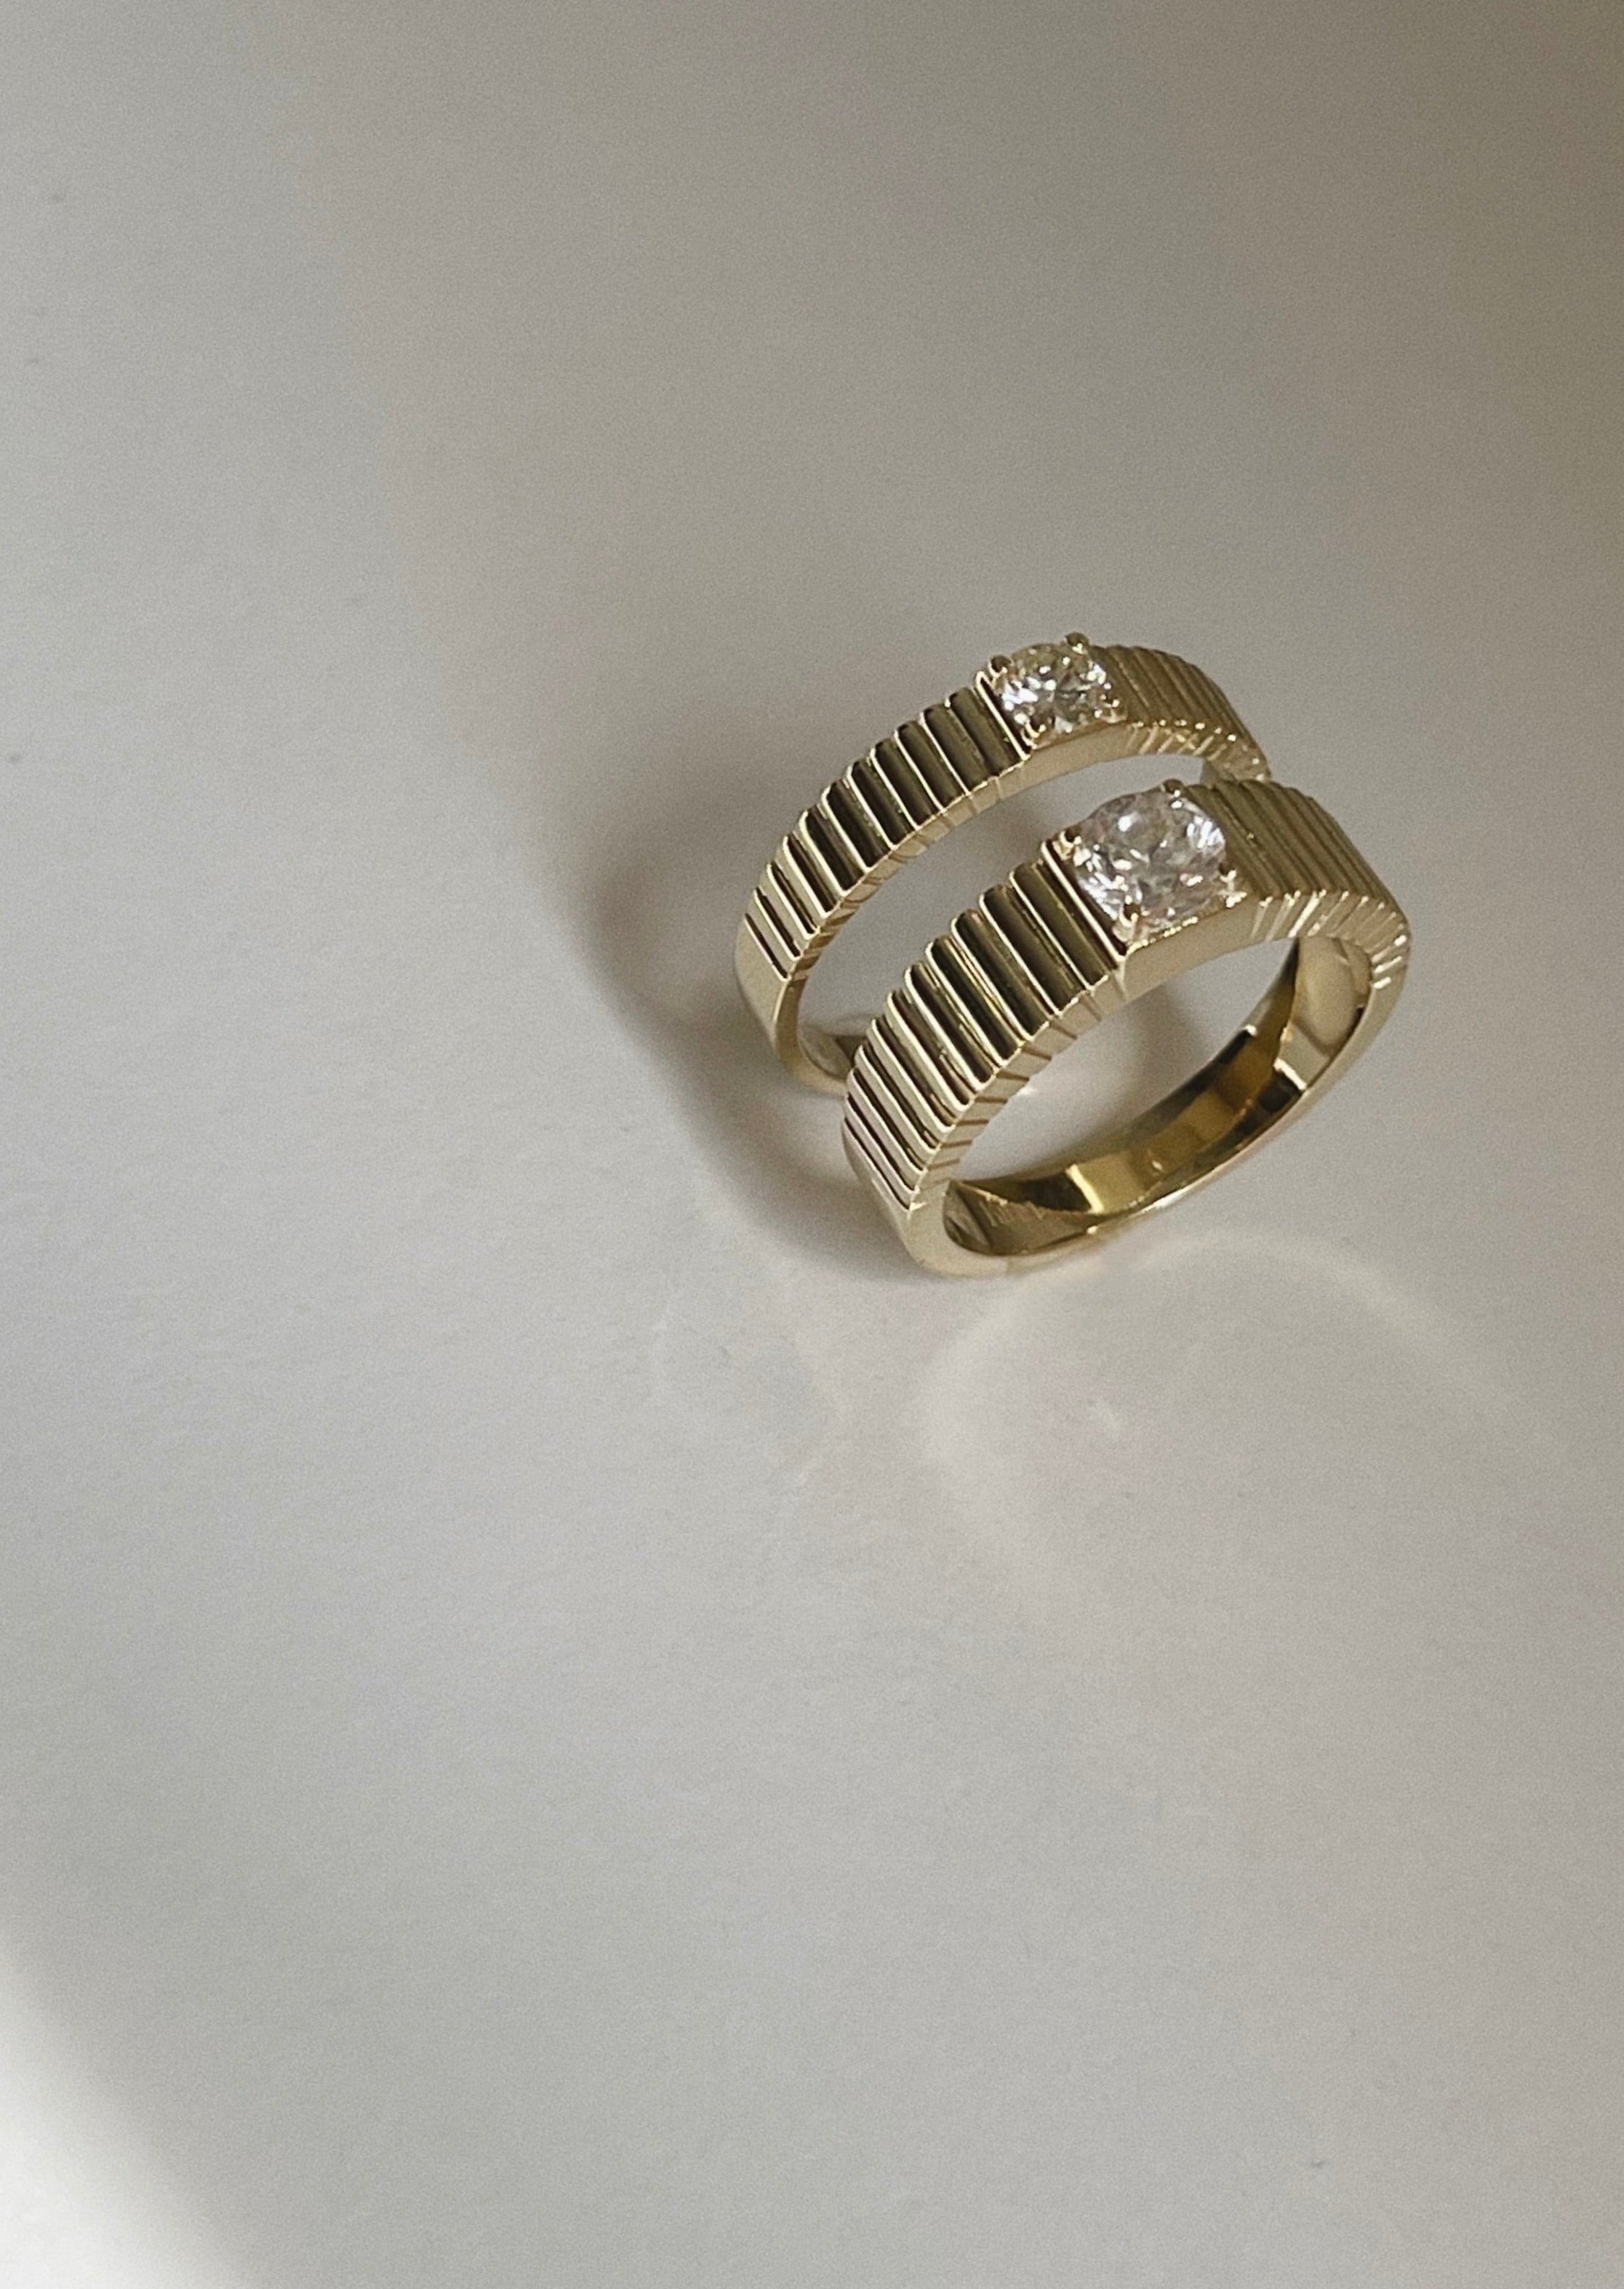 alt="Mini Solis Ribbed Ring II with solis ribbed ring II"